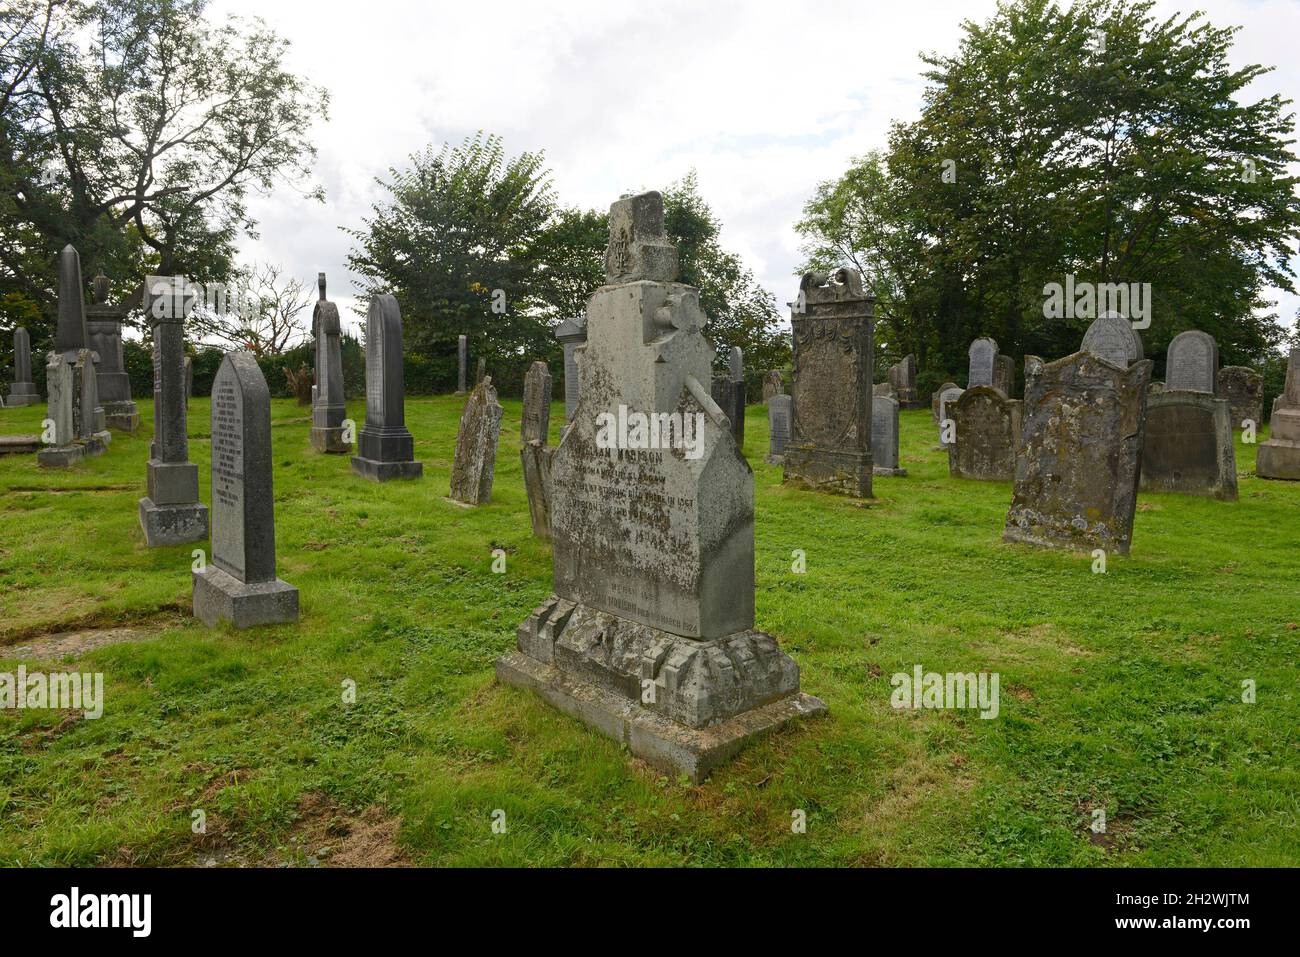 The ancient graveyard of the church of the Holy Rude in Stirling, Scotland. Stock Photo